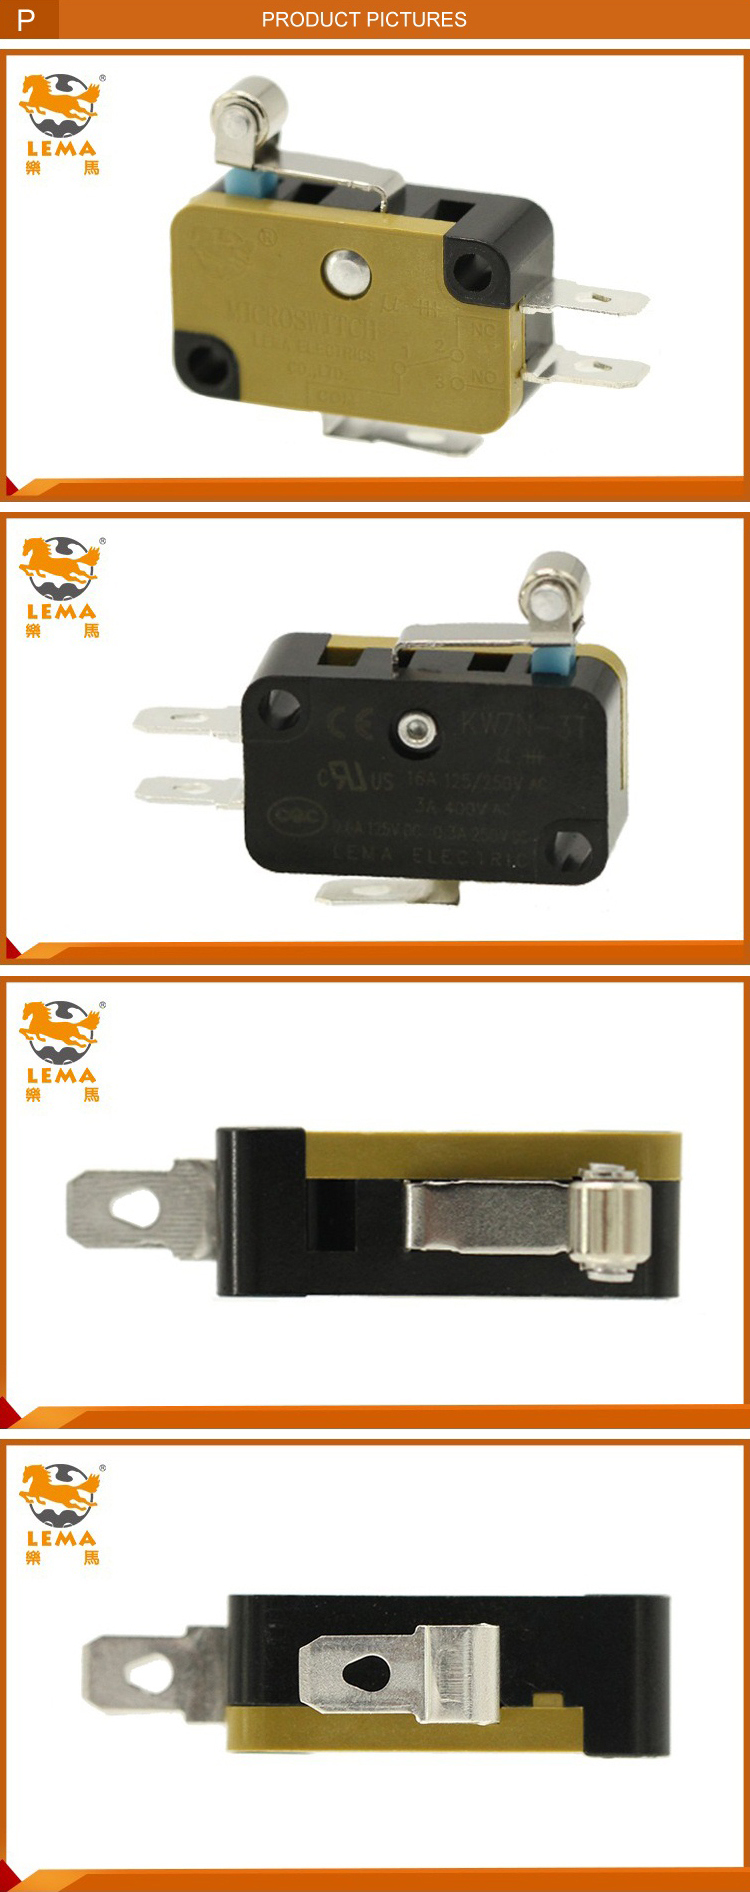 High Quality Kw7n-3t Roller Lever Actuator Magnetic Micro Switch